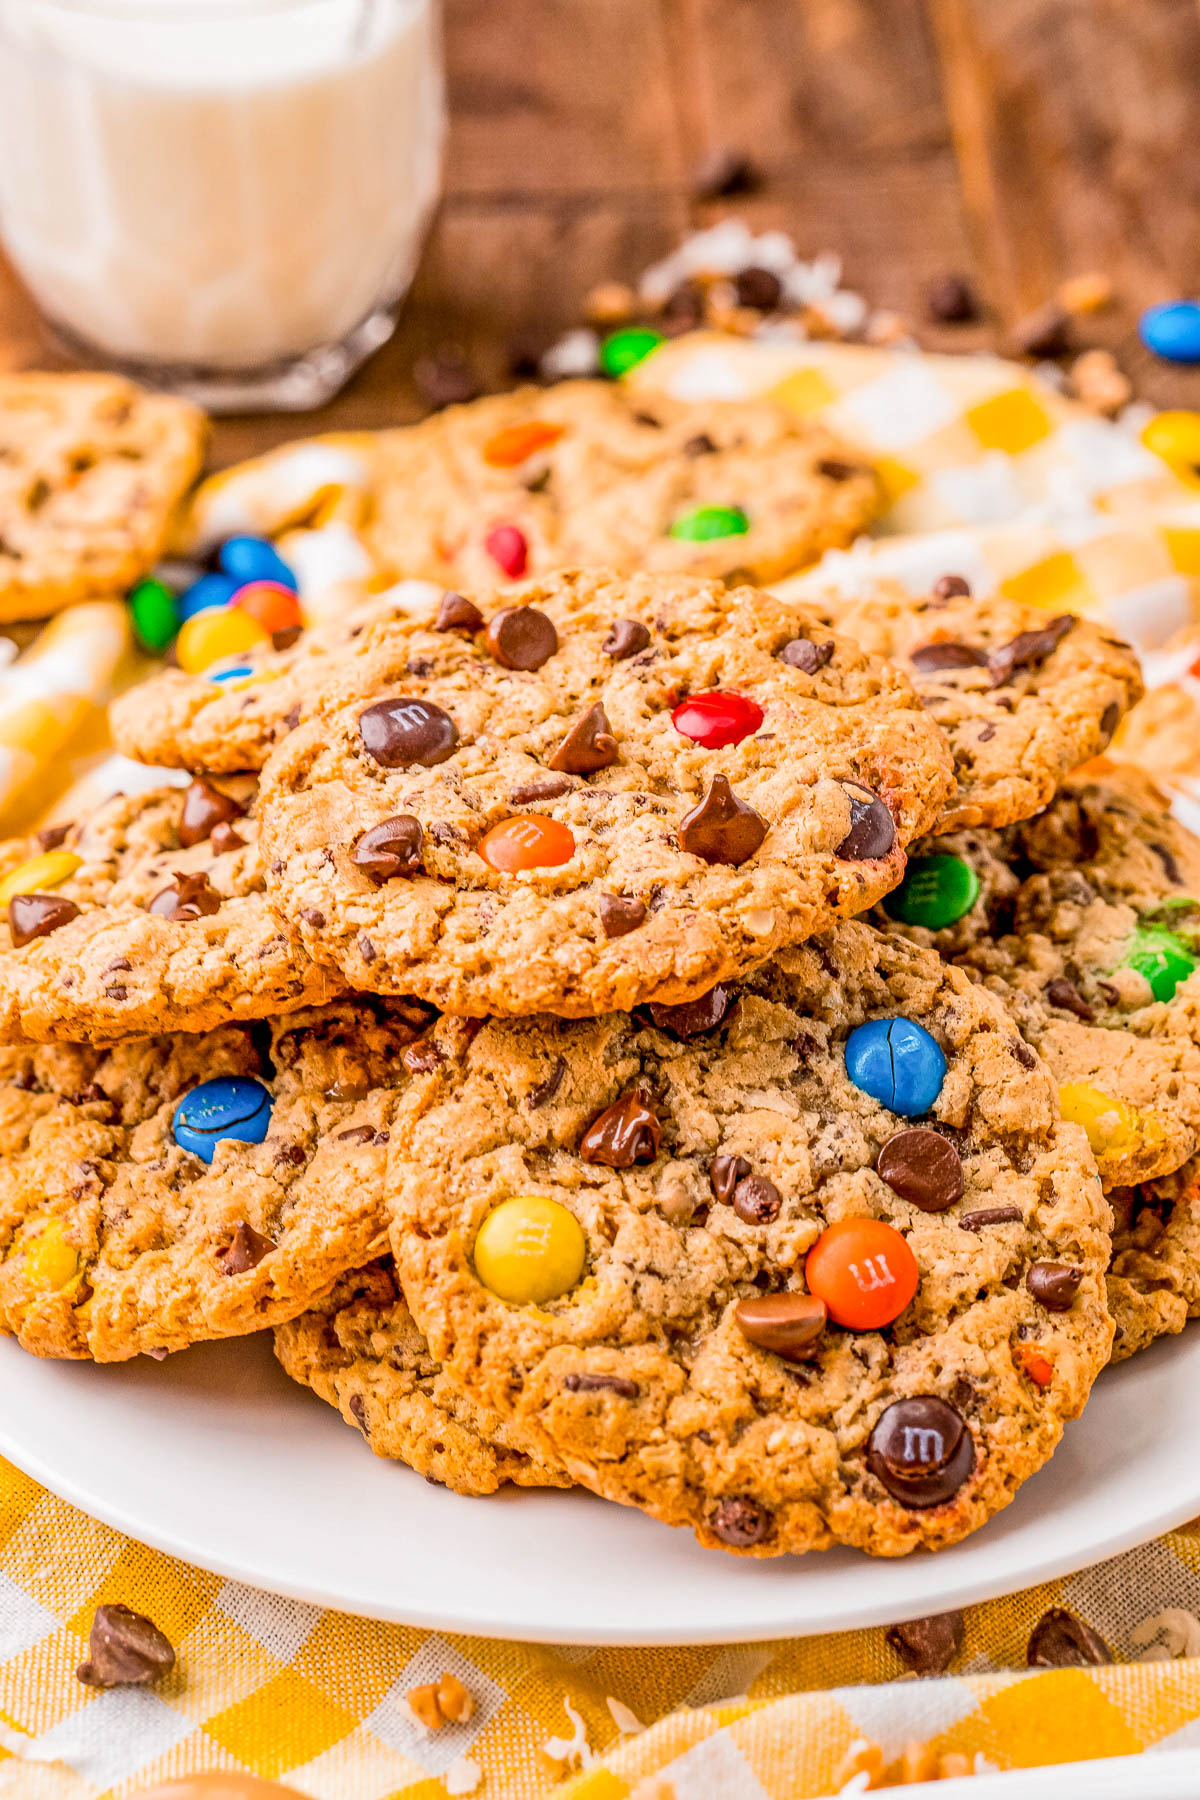 Monster Cookies - My recipe for classic monster cookies that are chock full of creamy peanut butter, oats, chocolate chips, and M&M's makes both kids and adults reach for just one more cookie! Fast, EASY, soft, perfectly chewy, and they'll become a family FAVORITE in no time! 